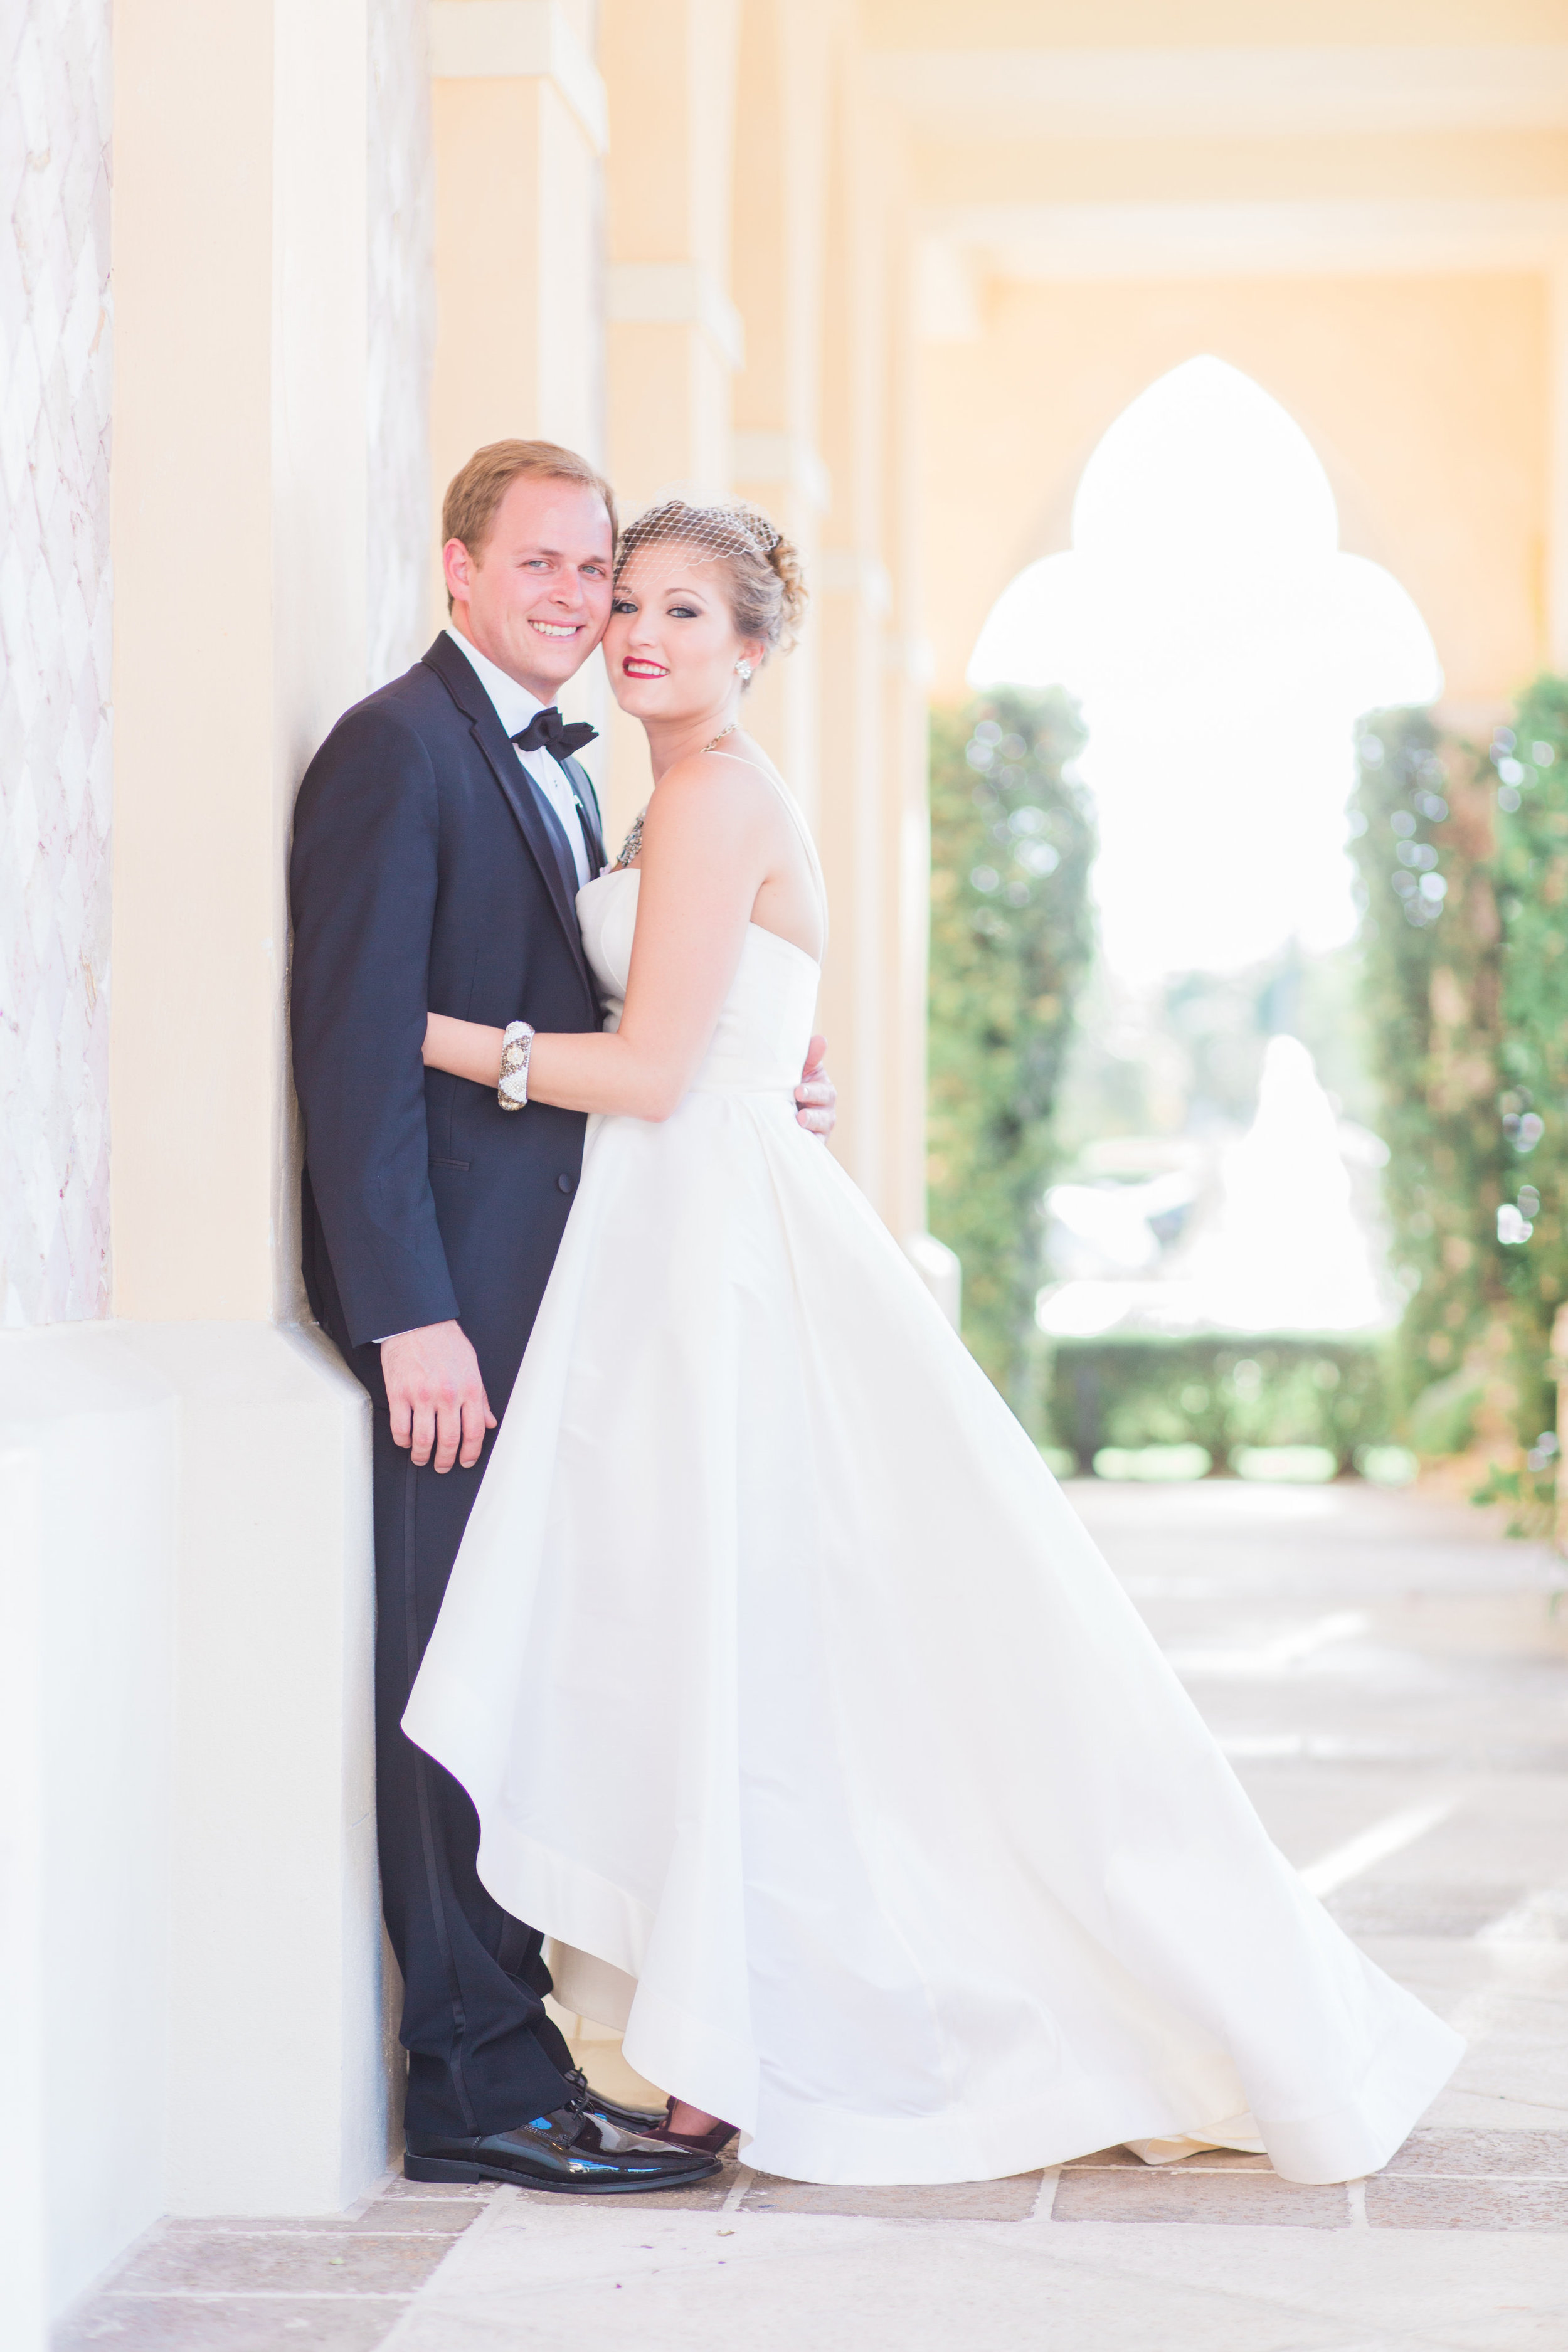  Anne Barge Ryland gown from Little White Dress in Denver | Boca Raton, Florida wedding at The Addison | Thompson Photography Group 